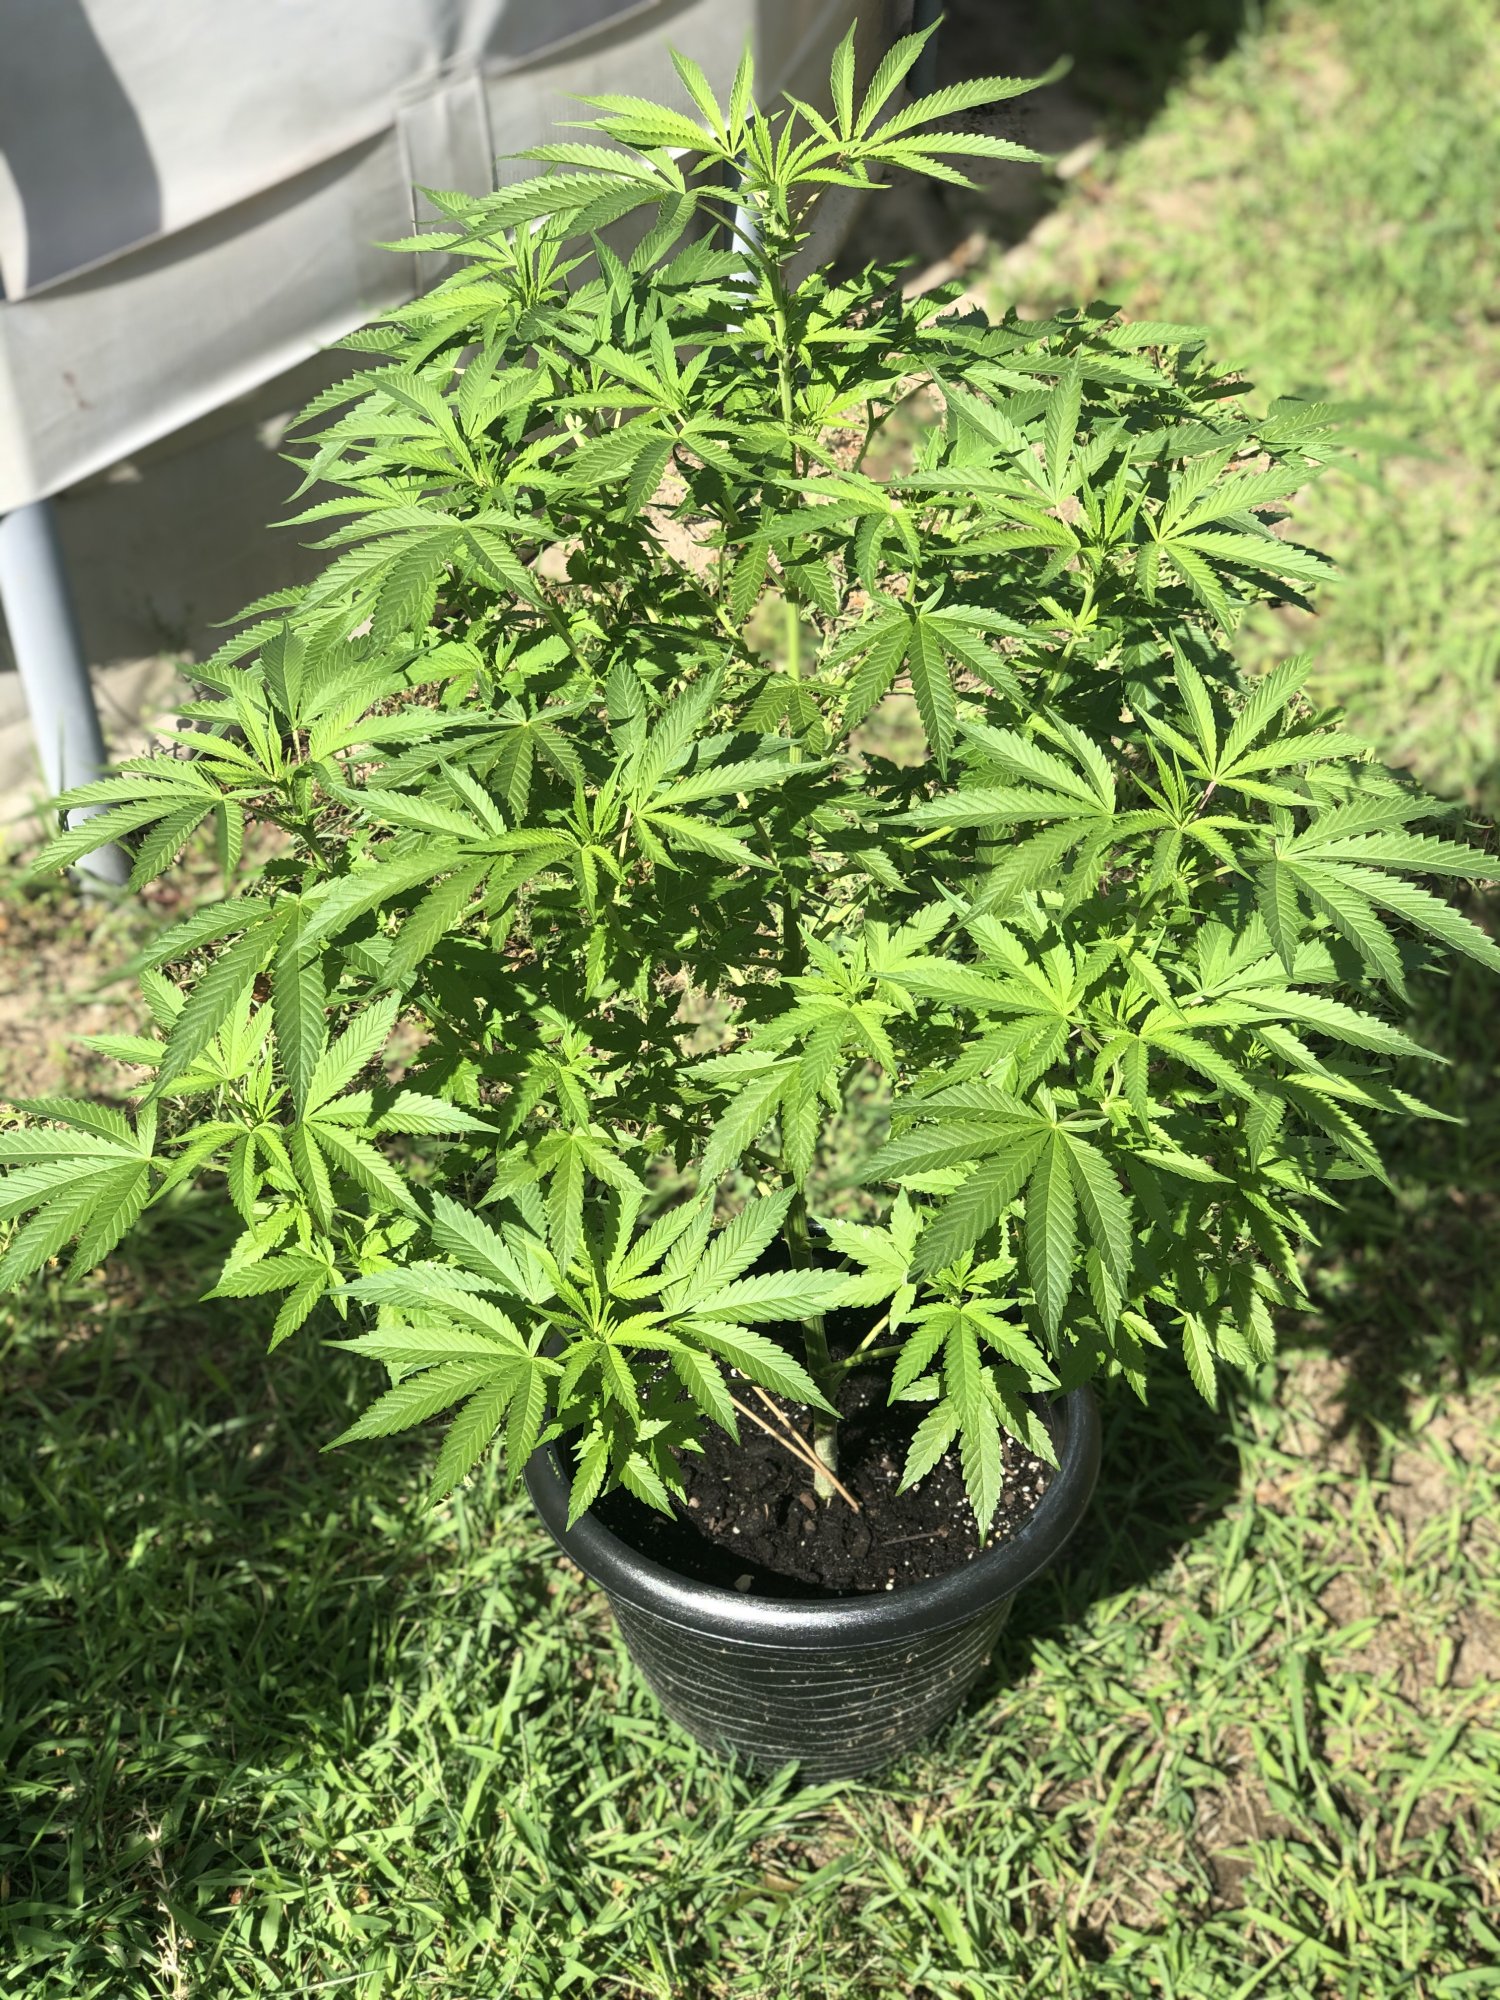 First time outdoor still learning any tips or advise greatly appreciated 10